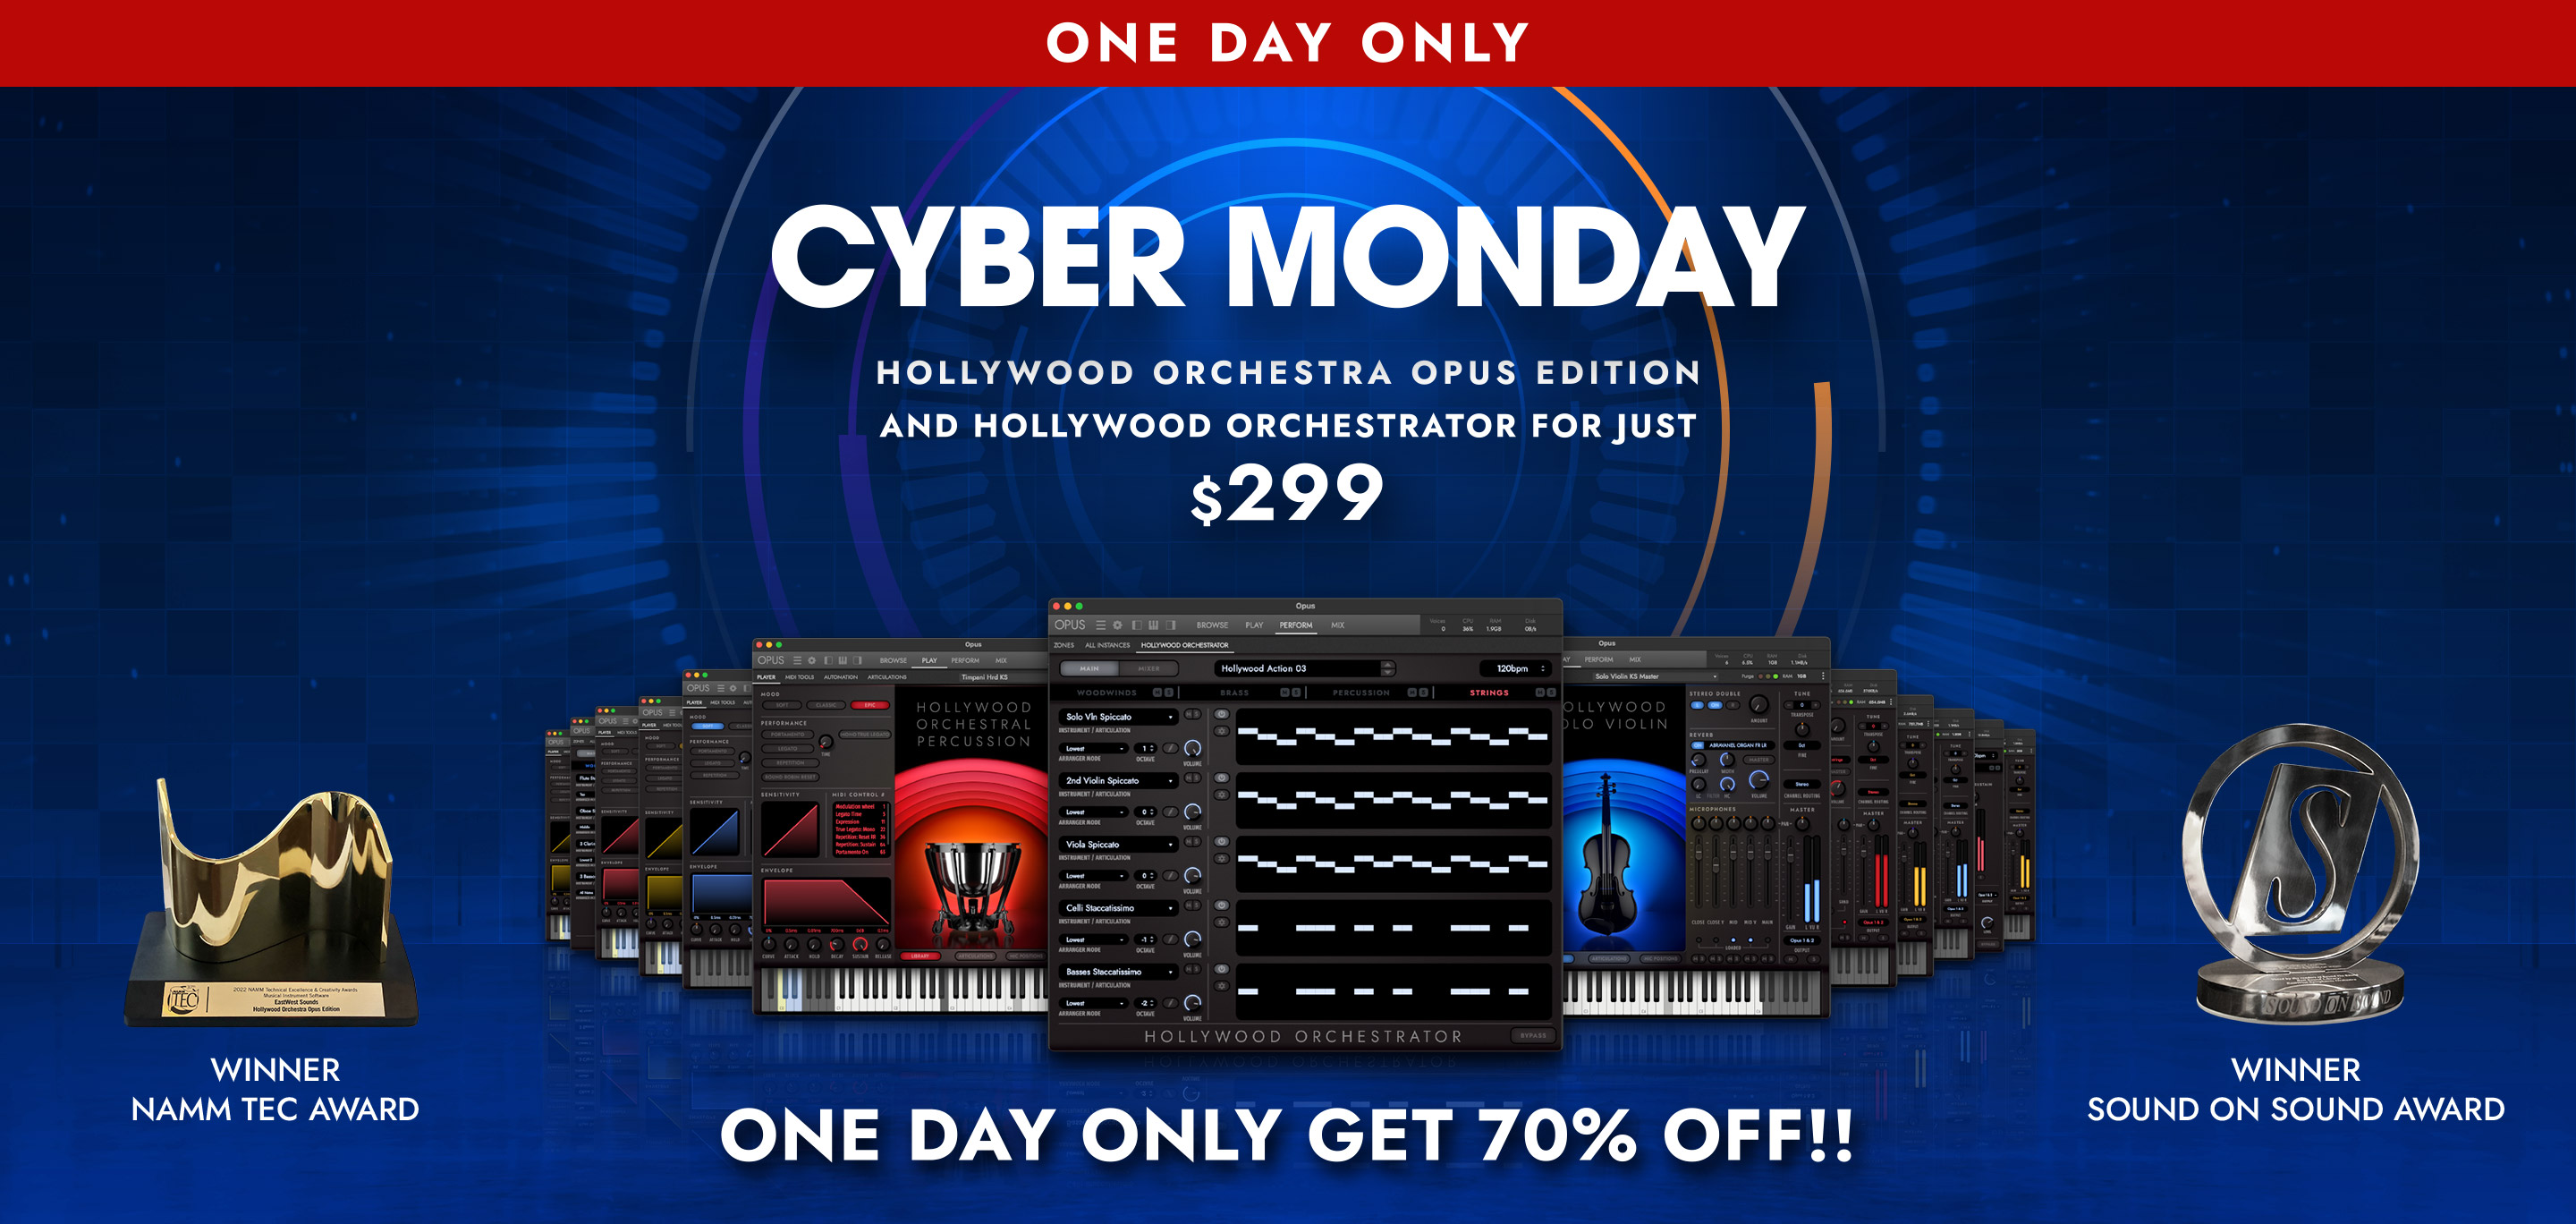 EastWest Cyber Monday Starts Now - Hollywood Orchestra Opus Edition for just $299